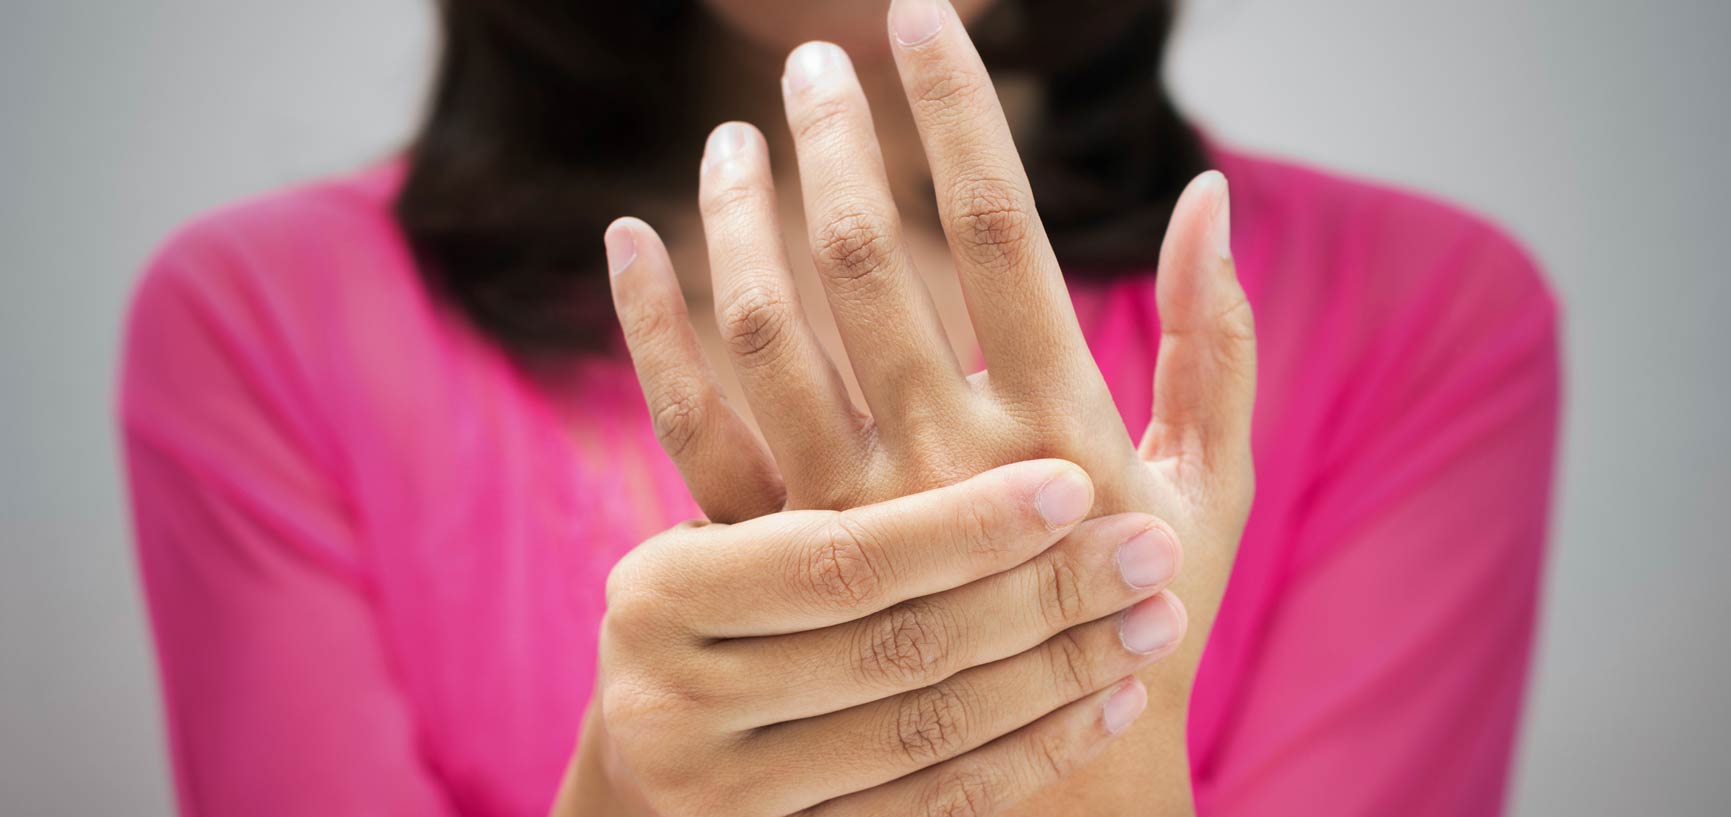 Get Your Grip Back! Tips to Soothe Aching Hands